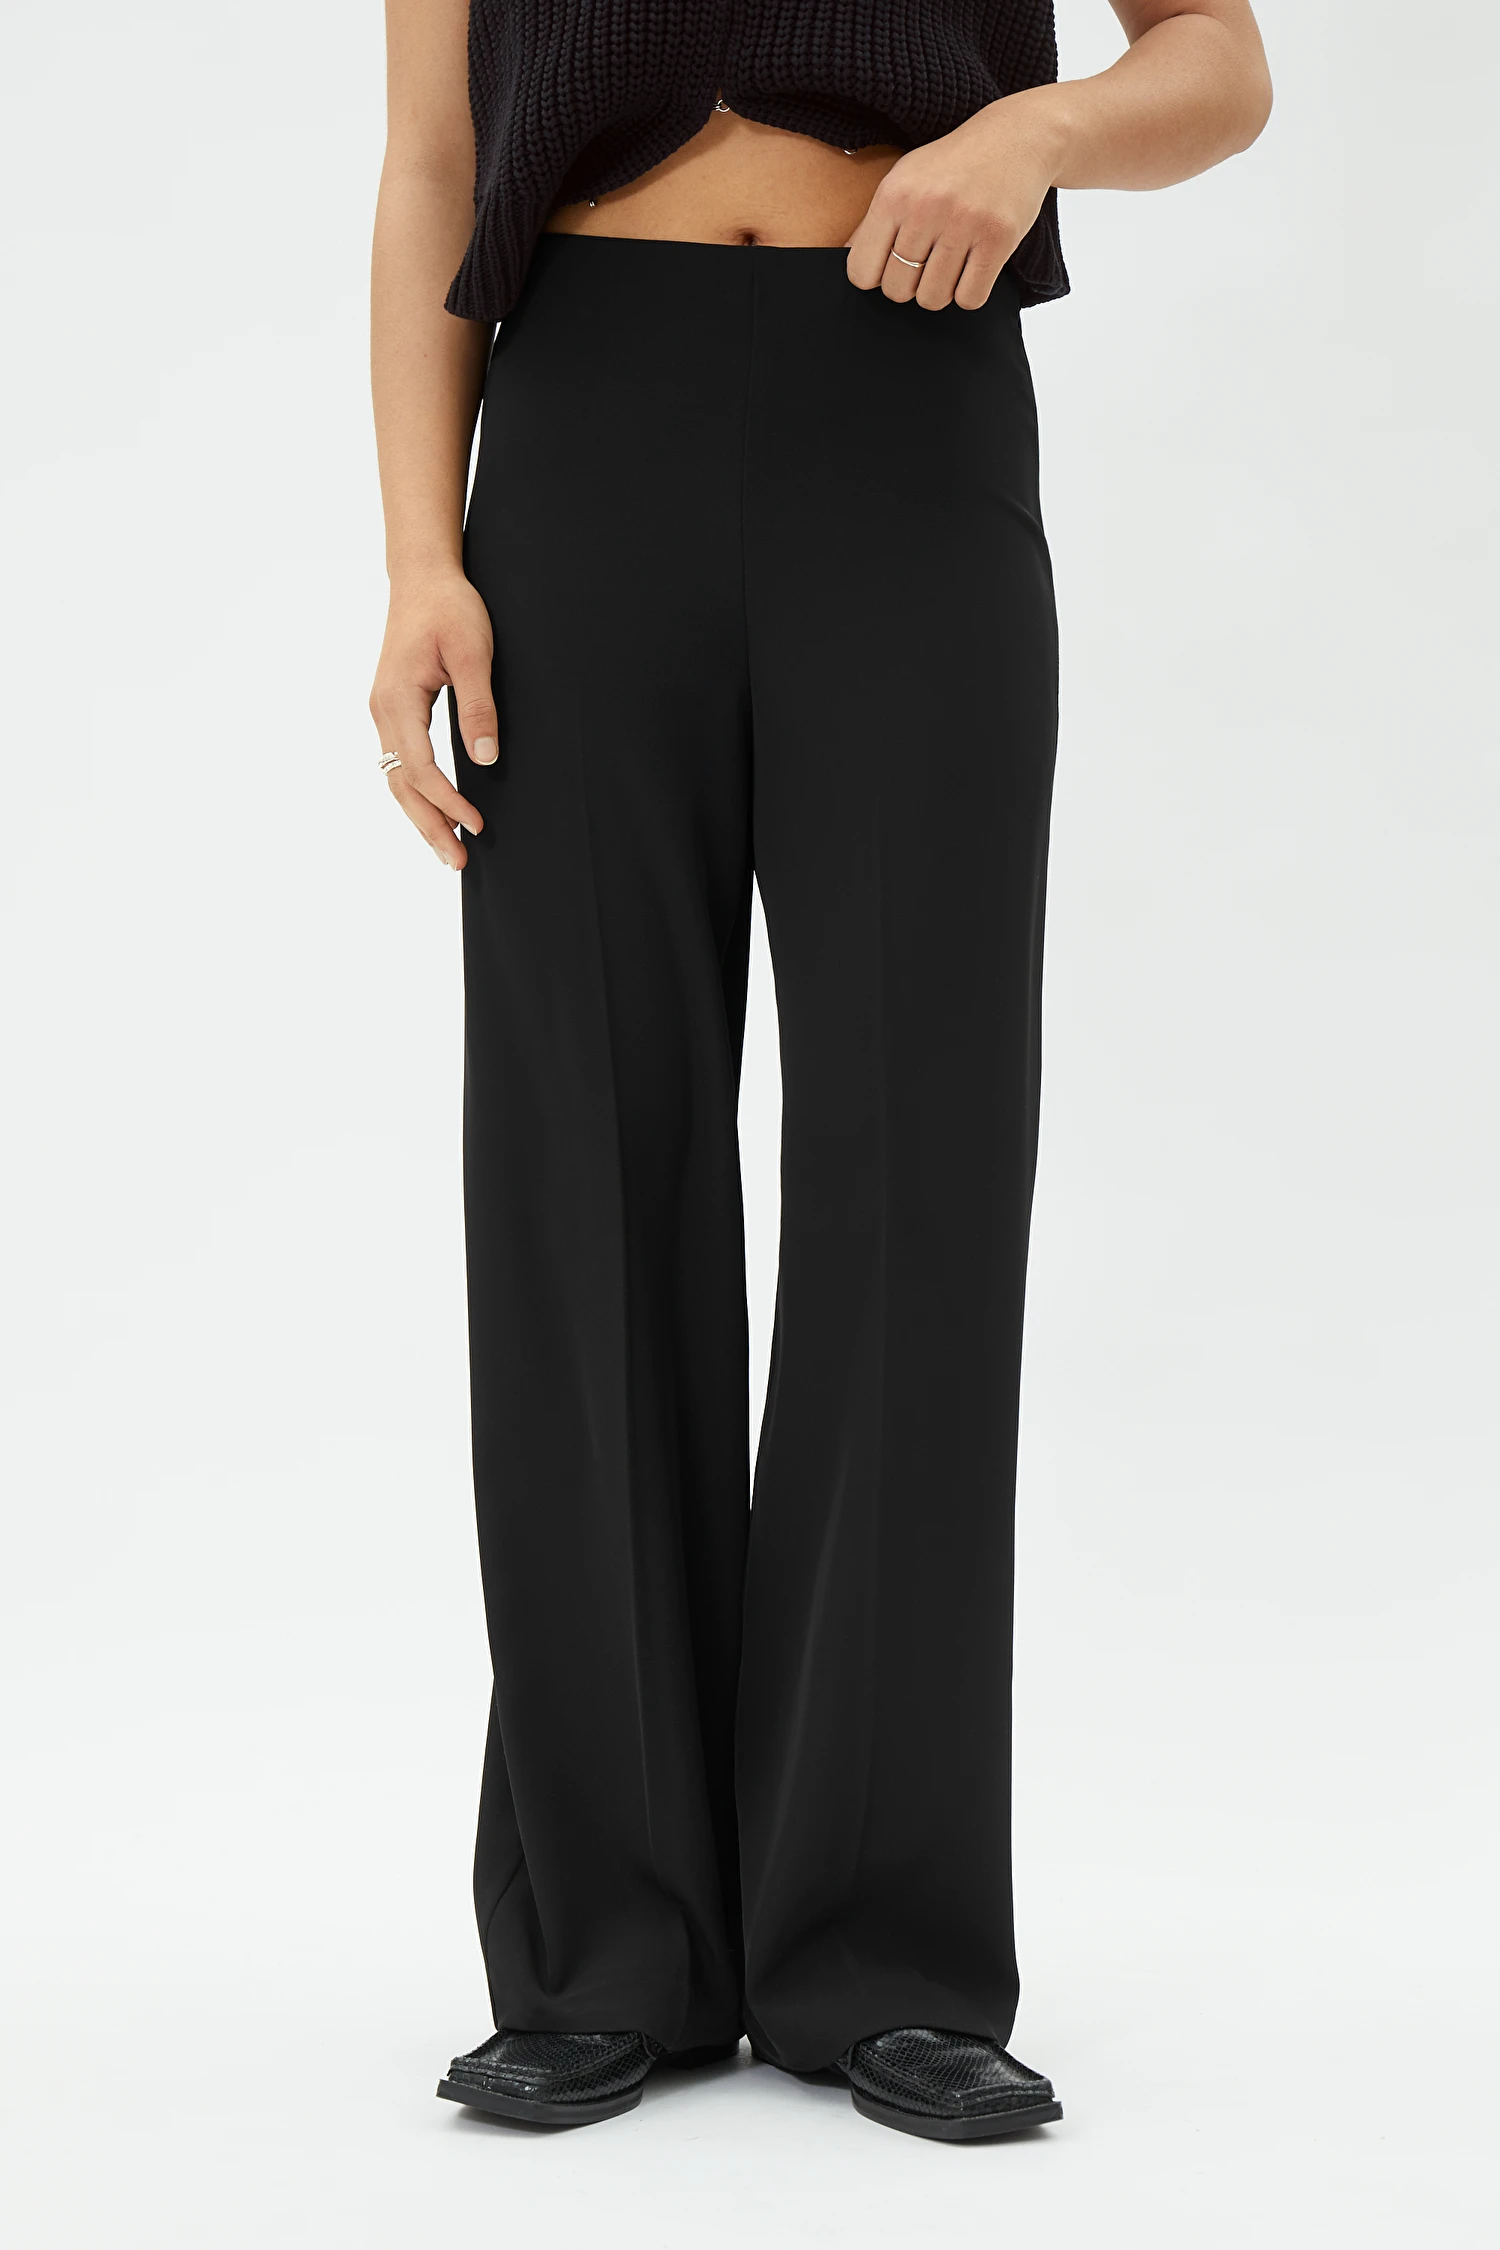 Buy Women Trousers Online | Trouser Pants for Ladies – Styched Fashion